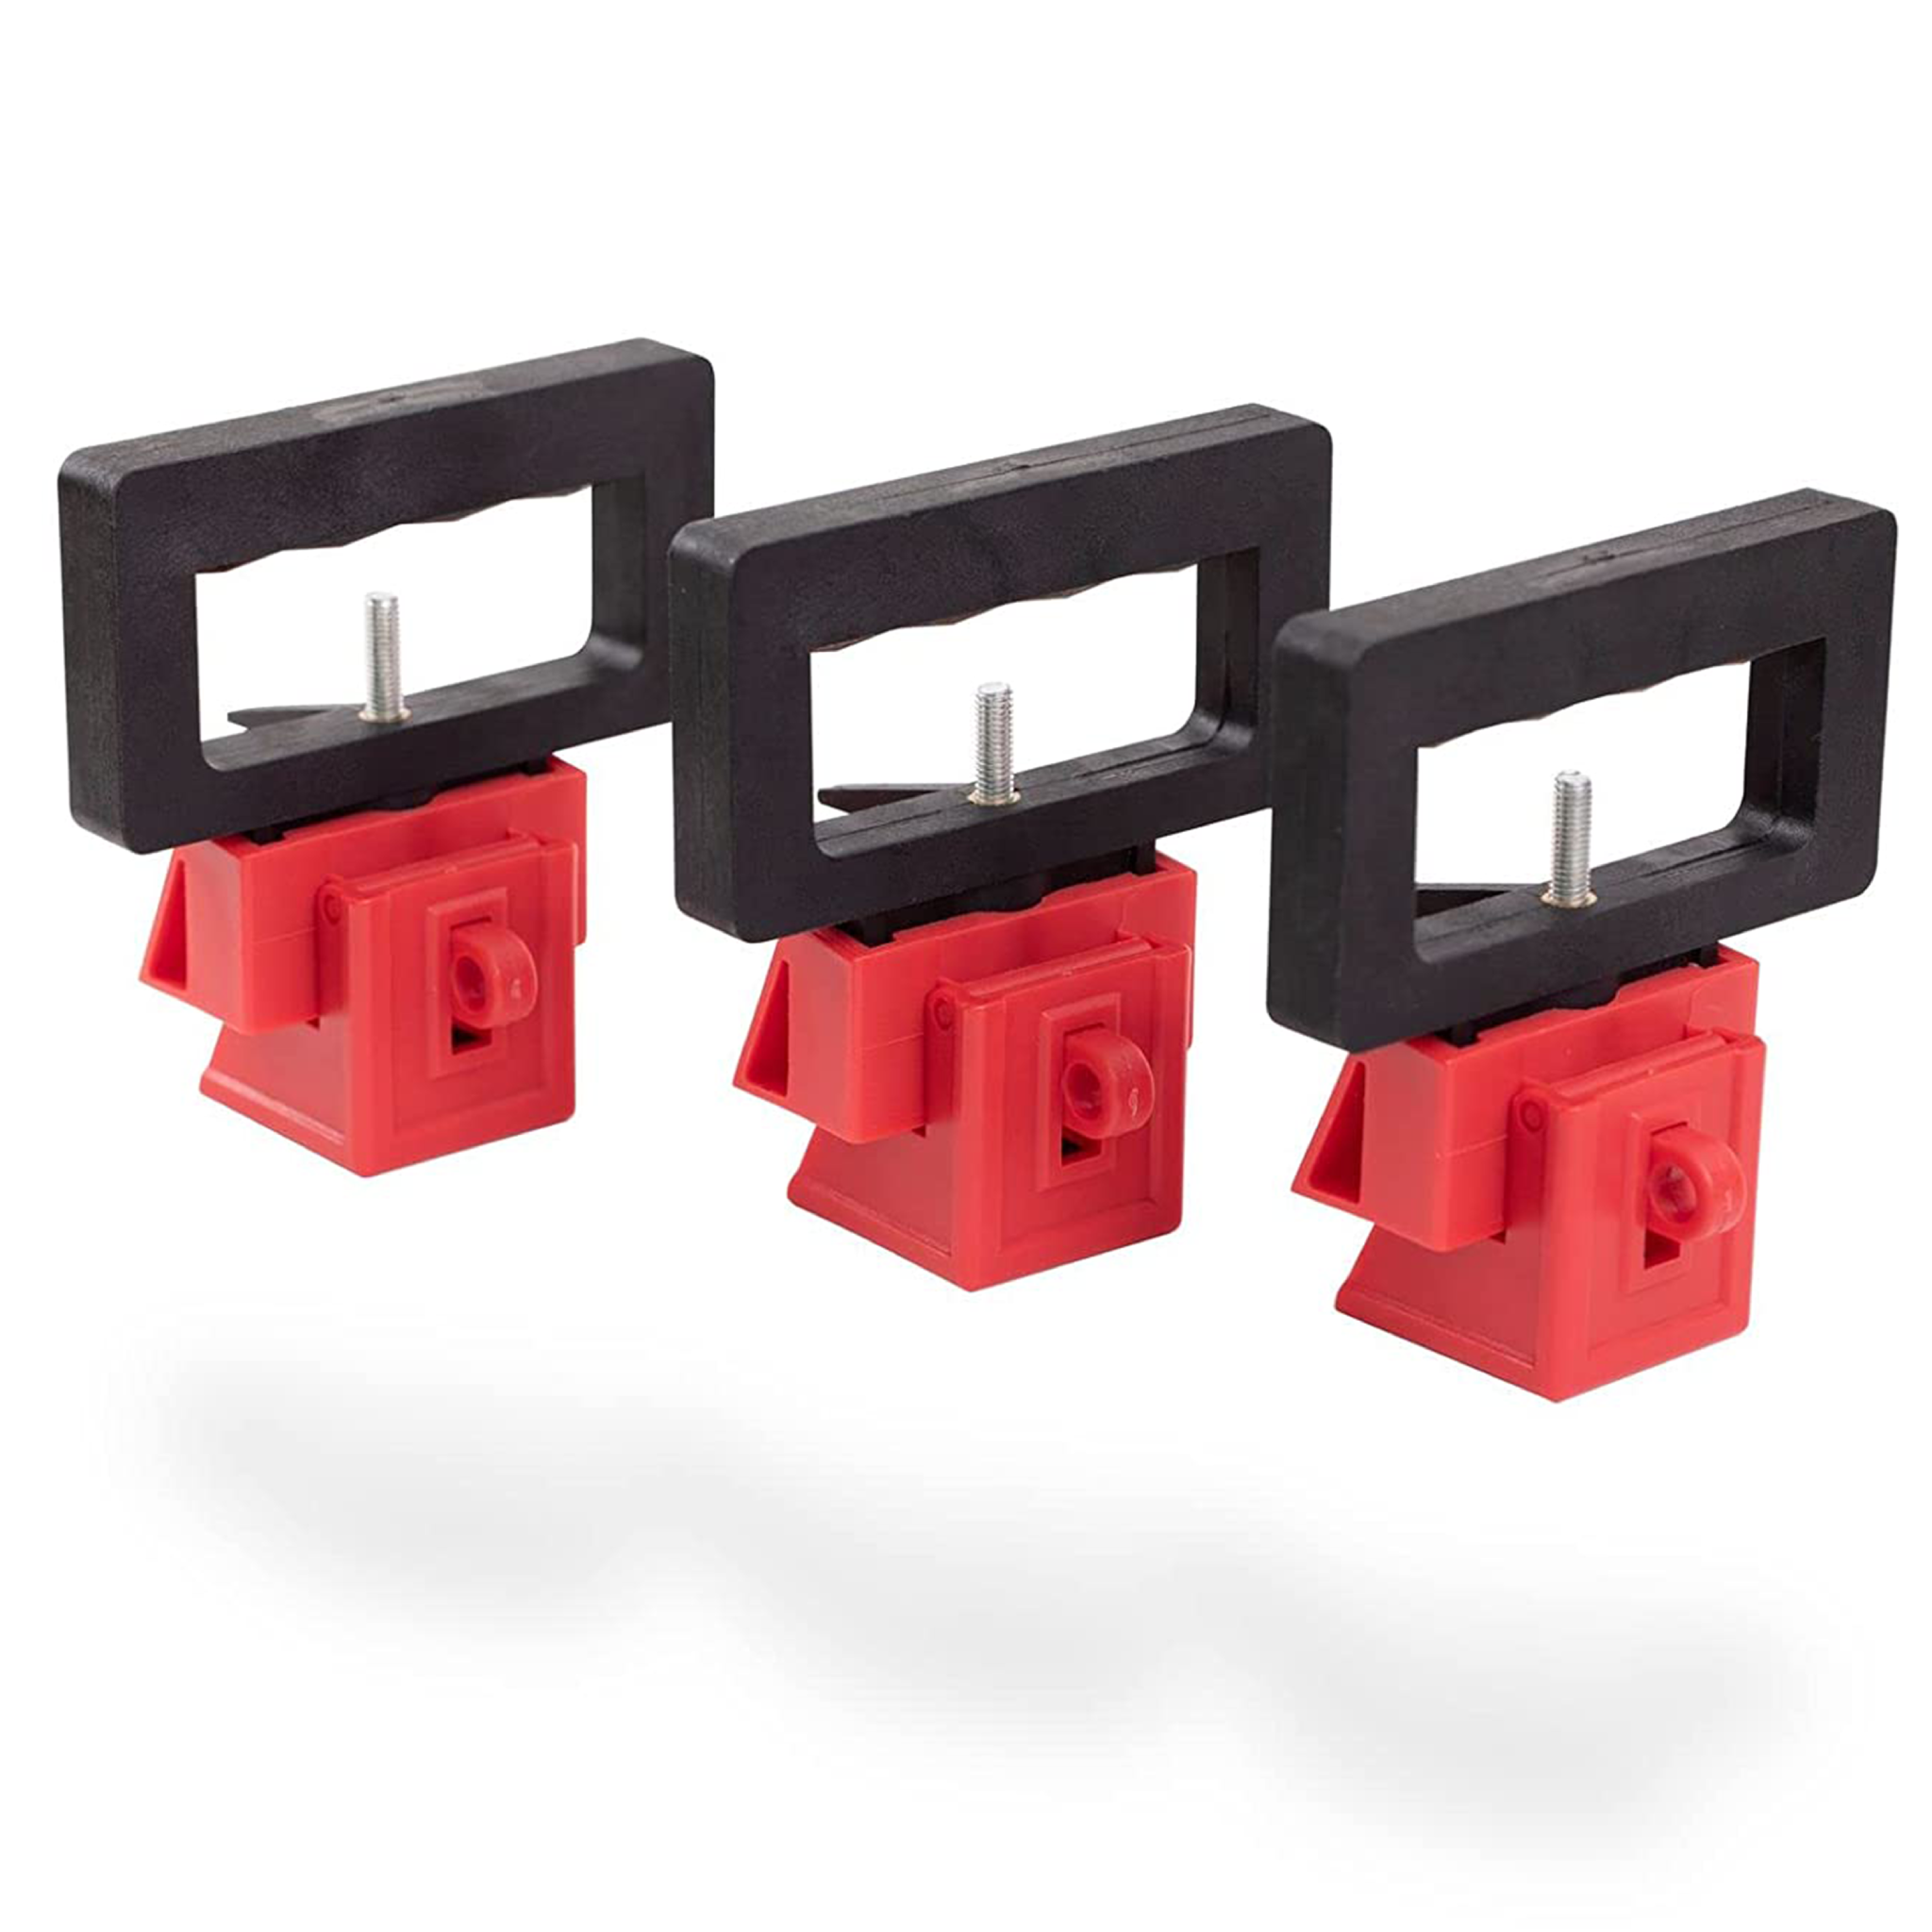 Clamp-on Circuit Breaker Lockout Device – Oversized 480/600 Volt – 3 Pack